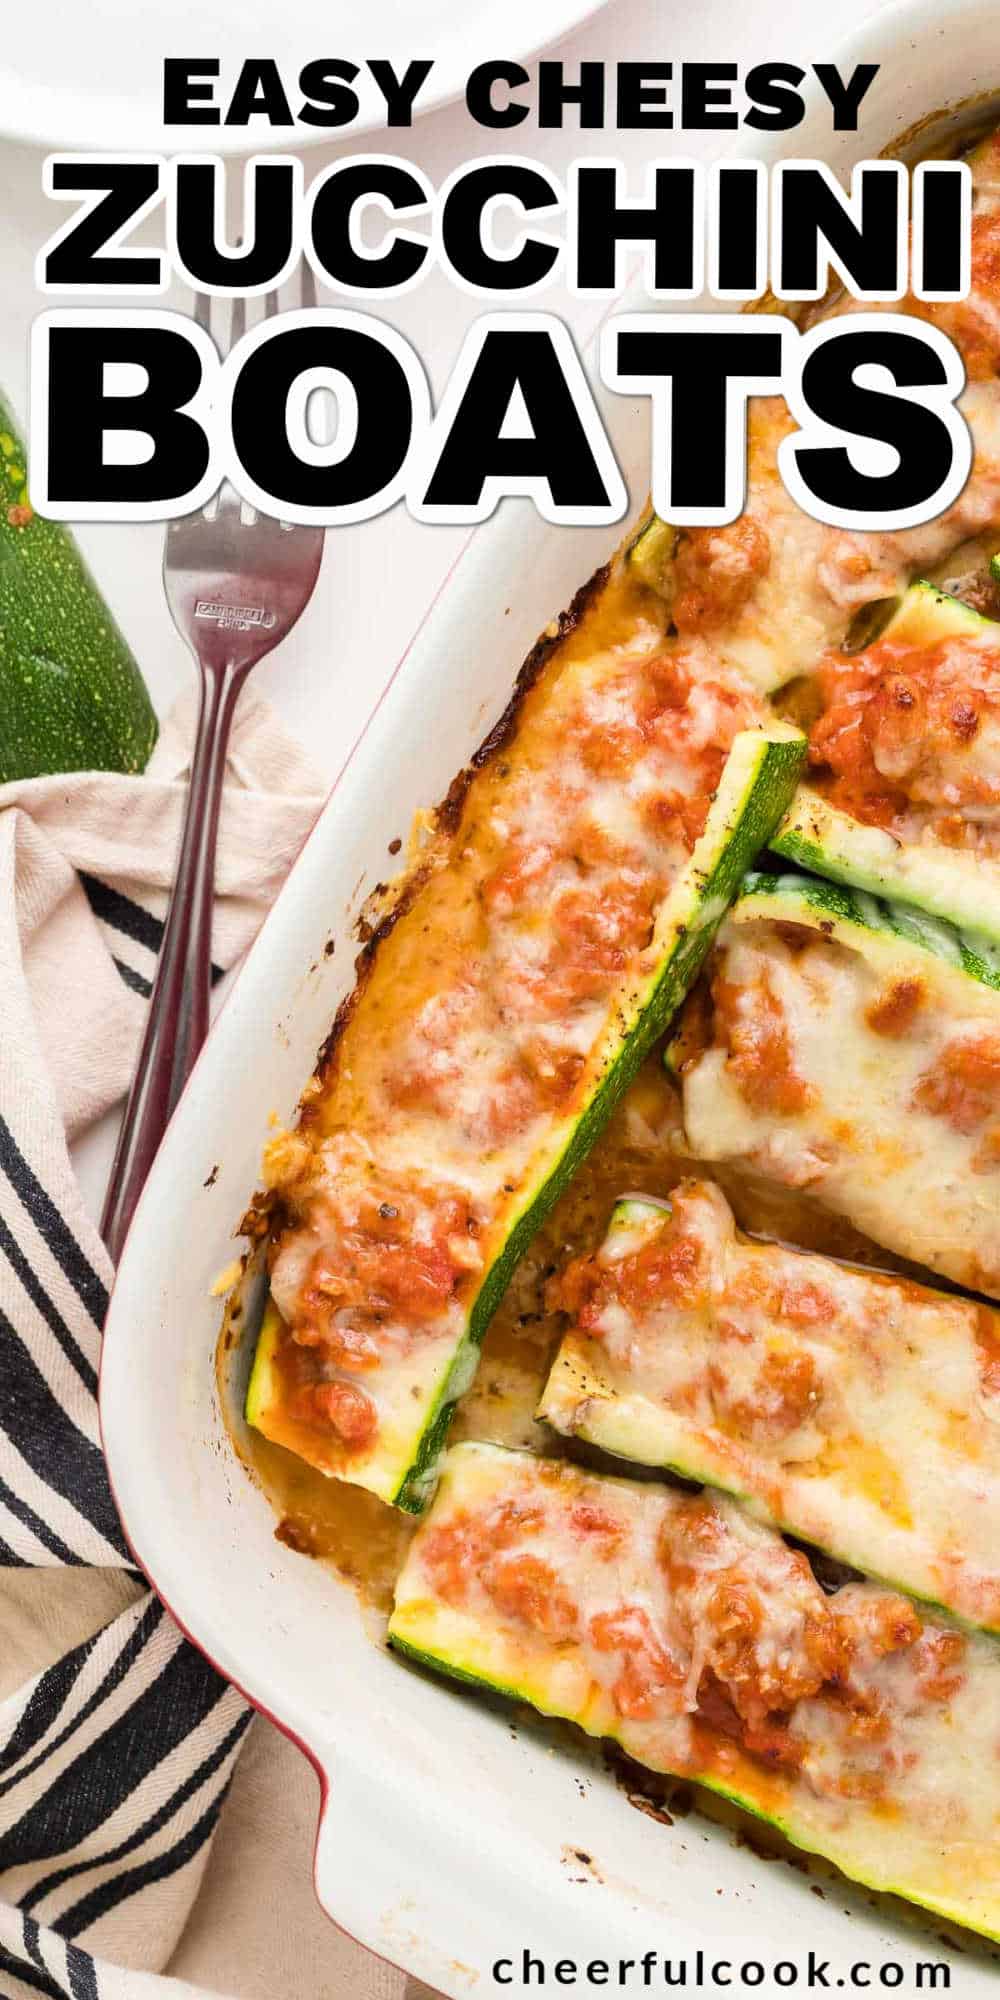 Sausage and cheese stuffed Zucchini Boats are one of our favorite summer dinner recipes. With just 5 ingredients and in less than 45 minutes you have a dinner ready that will leave bellies full and plates empty. Easy Zucchini Boats | Sausage Stuffed Zucchini Shells Recipe | Zucchini Dinner Recipe #cheerfulcook #zucchini #dinner #easy #stuffedzucchini via @cheerfulcook